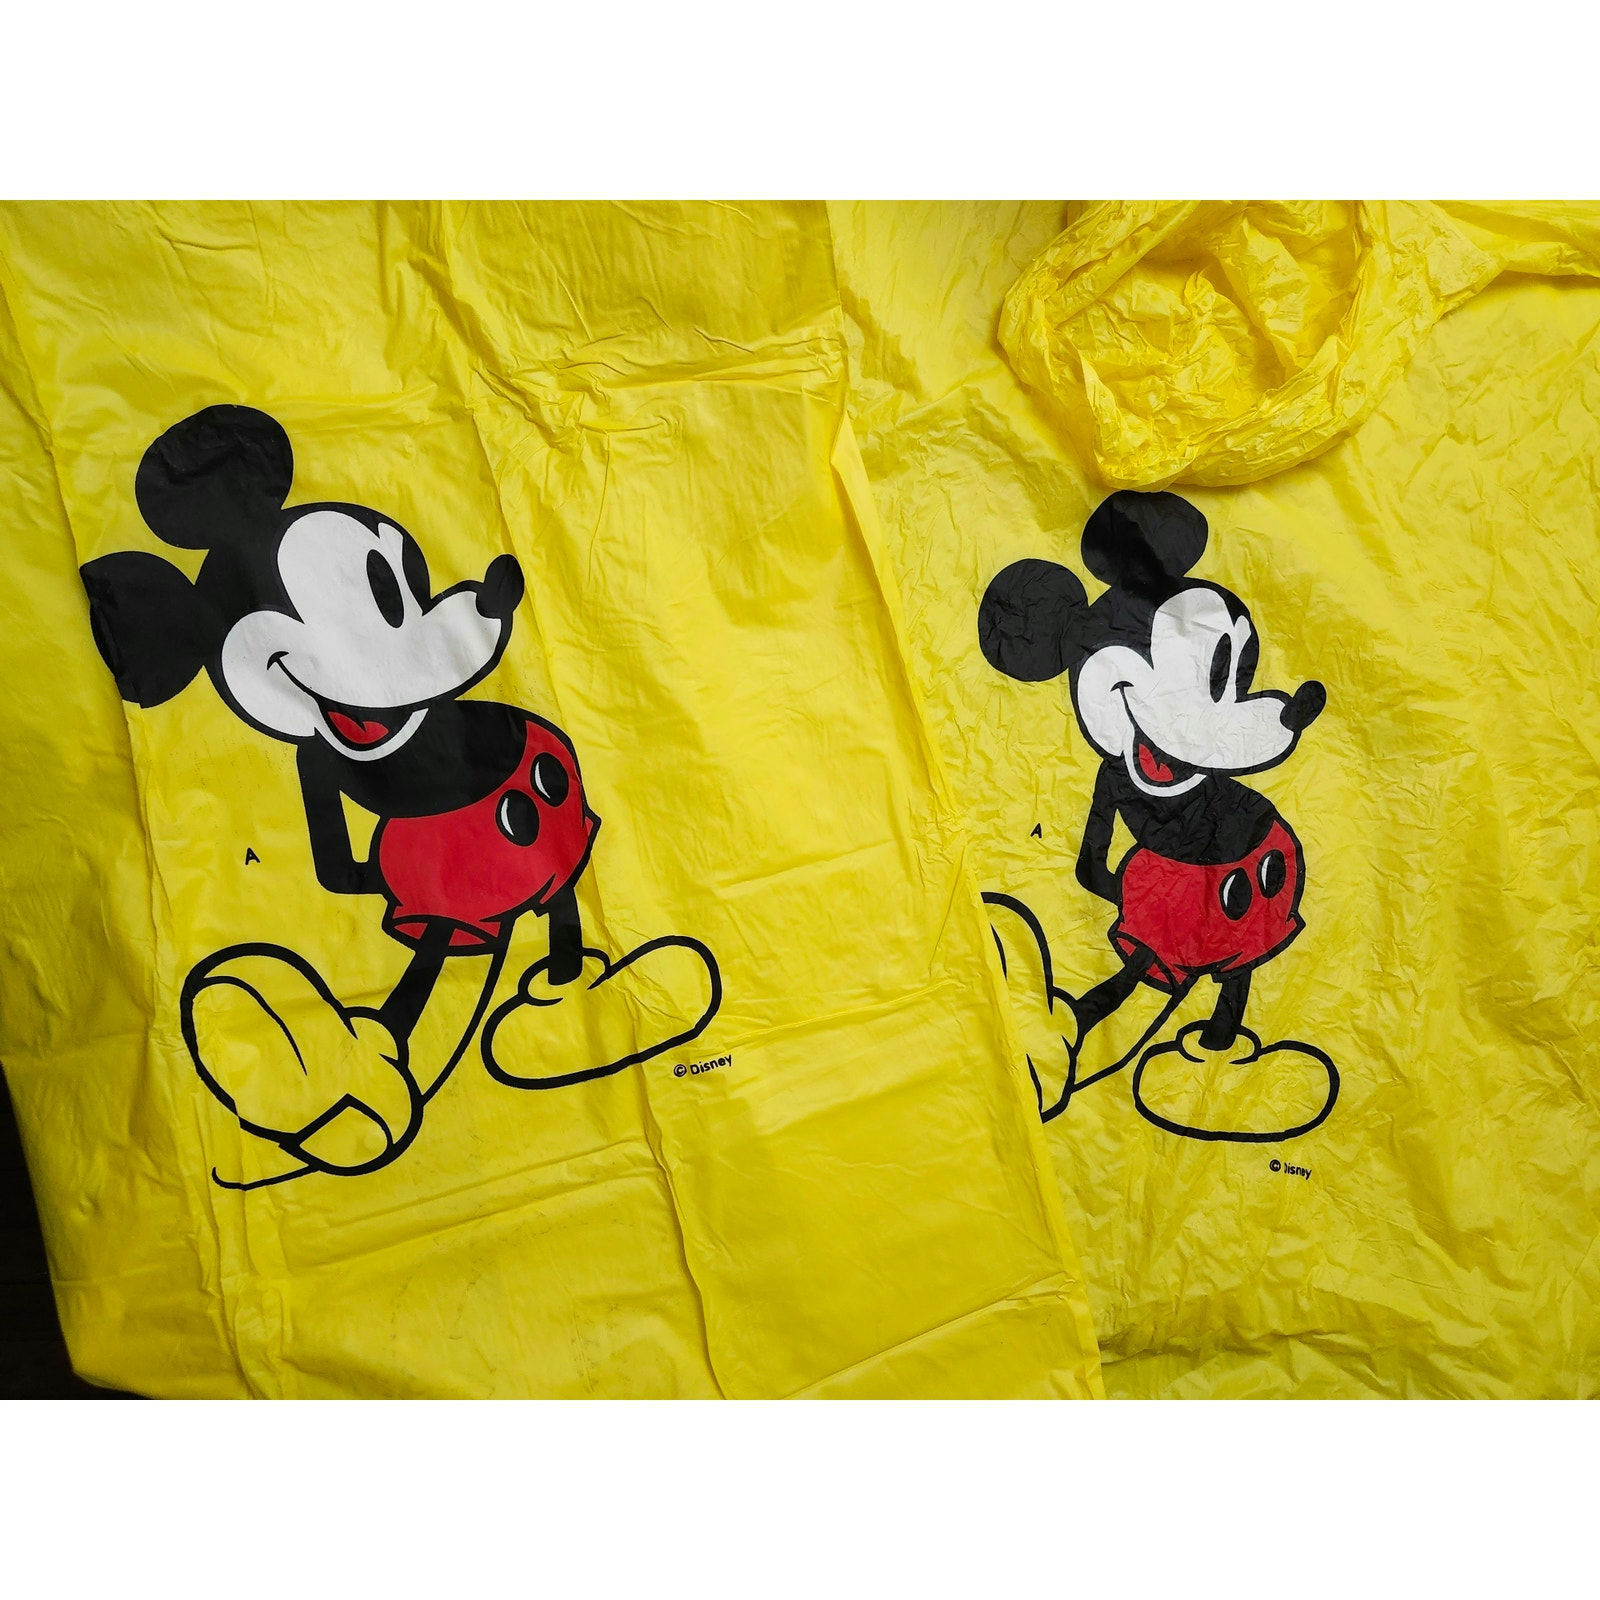 Primary image for Lot 2 Vintage Mickey Disney Yellow Ponchos Adult Sized Snap Button Sides